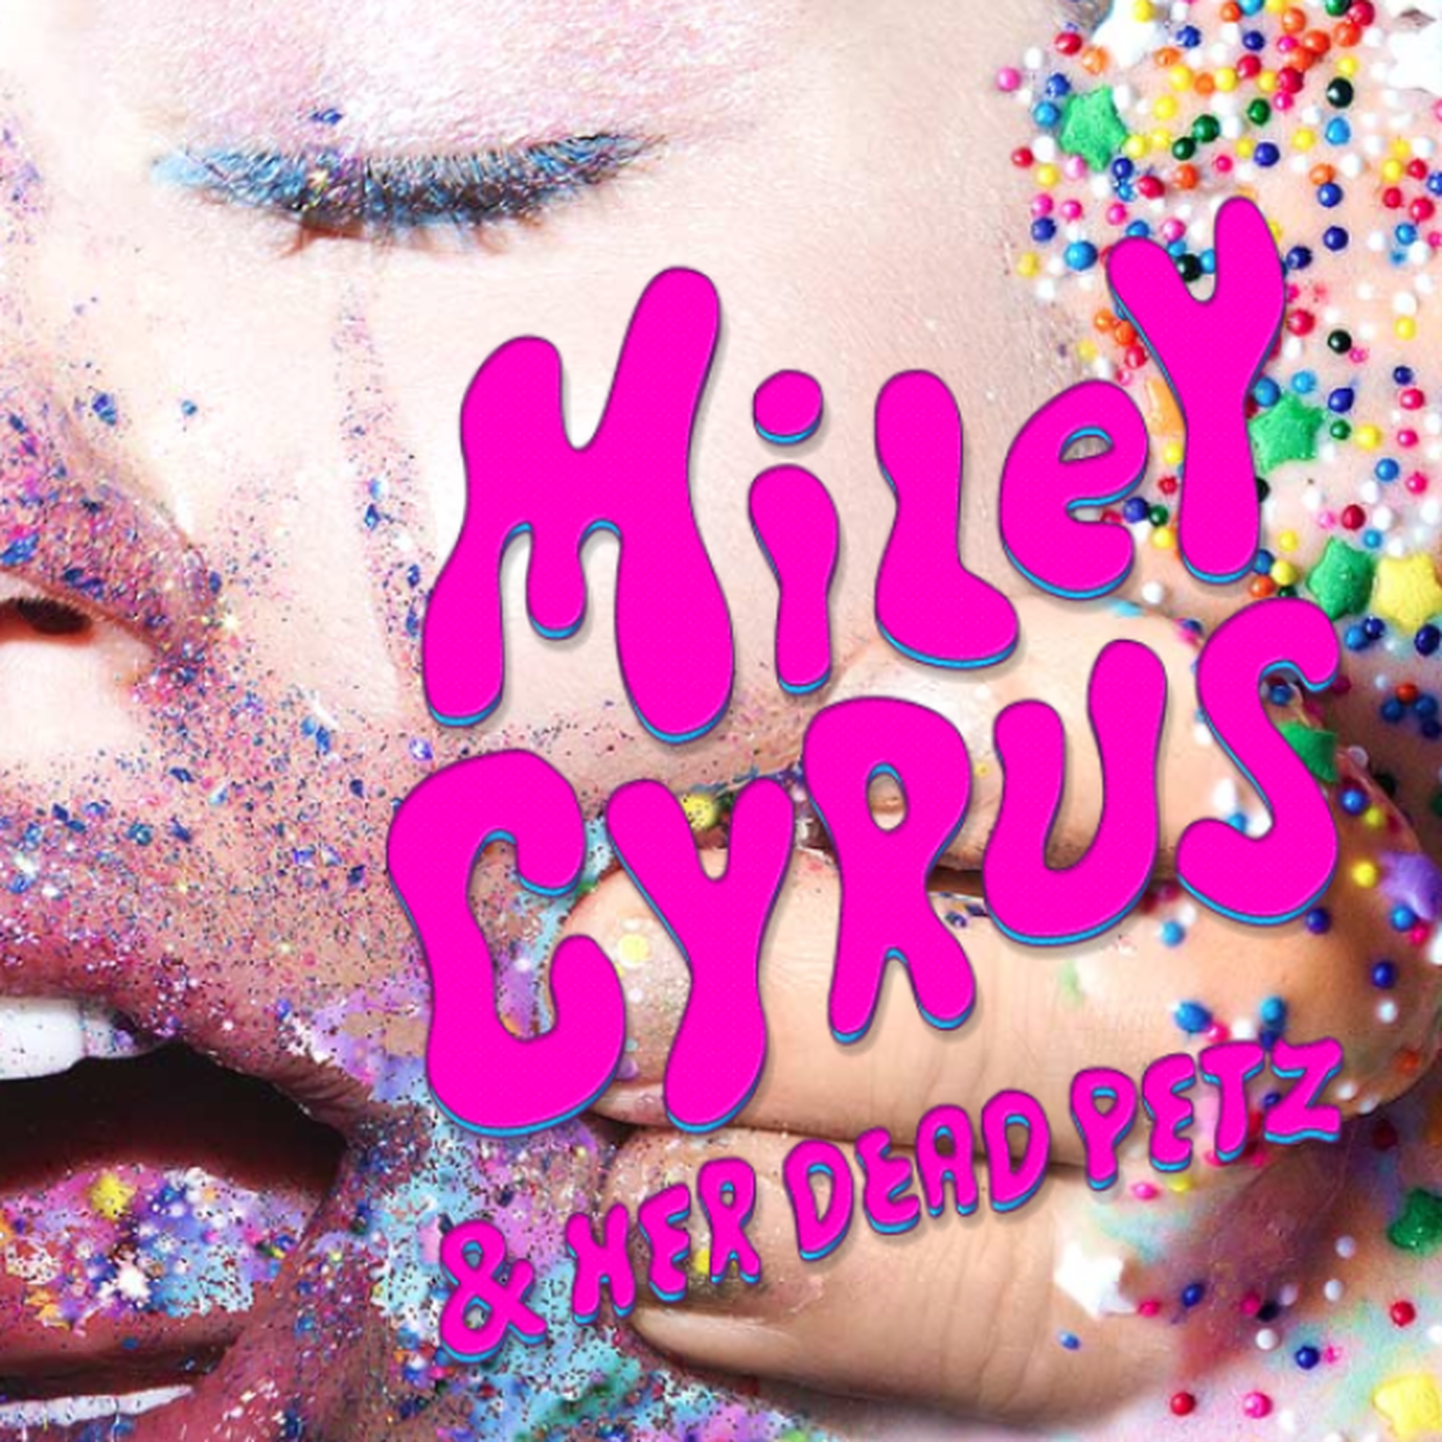 Miley Cyrus- Miley Cyrus and Her Dead Petz